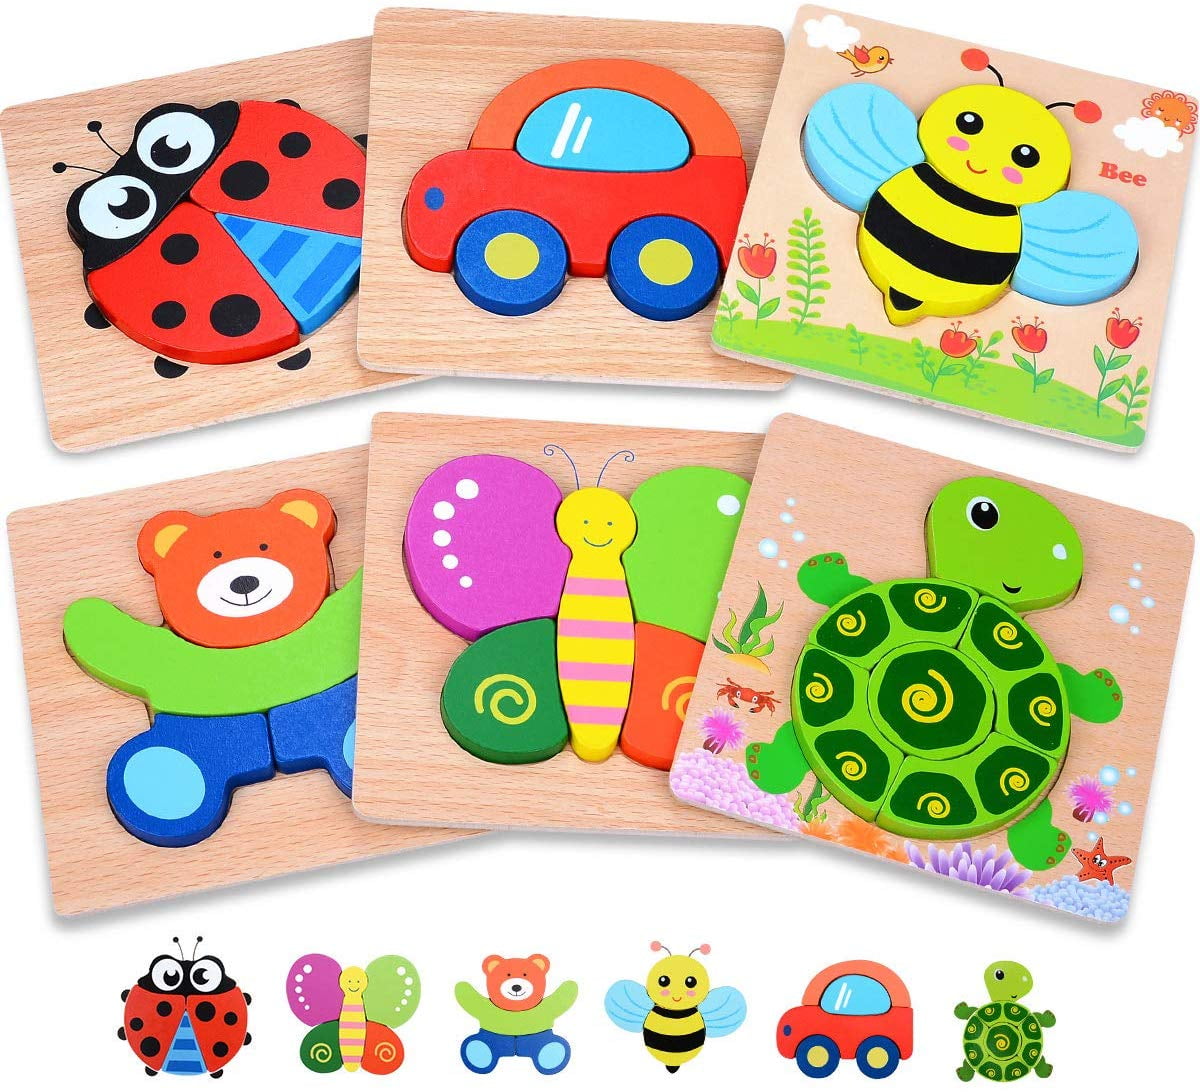 Details about   Educational Kids Learning Toy Wooden 3D Puzzle Jigsaw Animal For Children Baby 